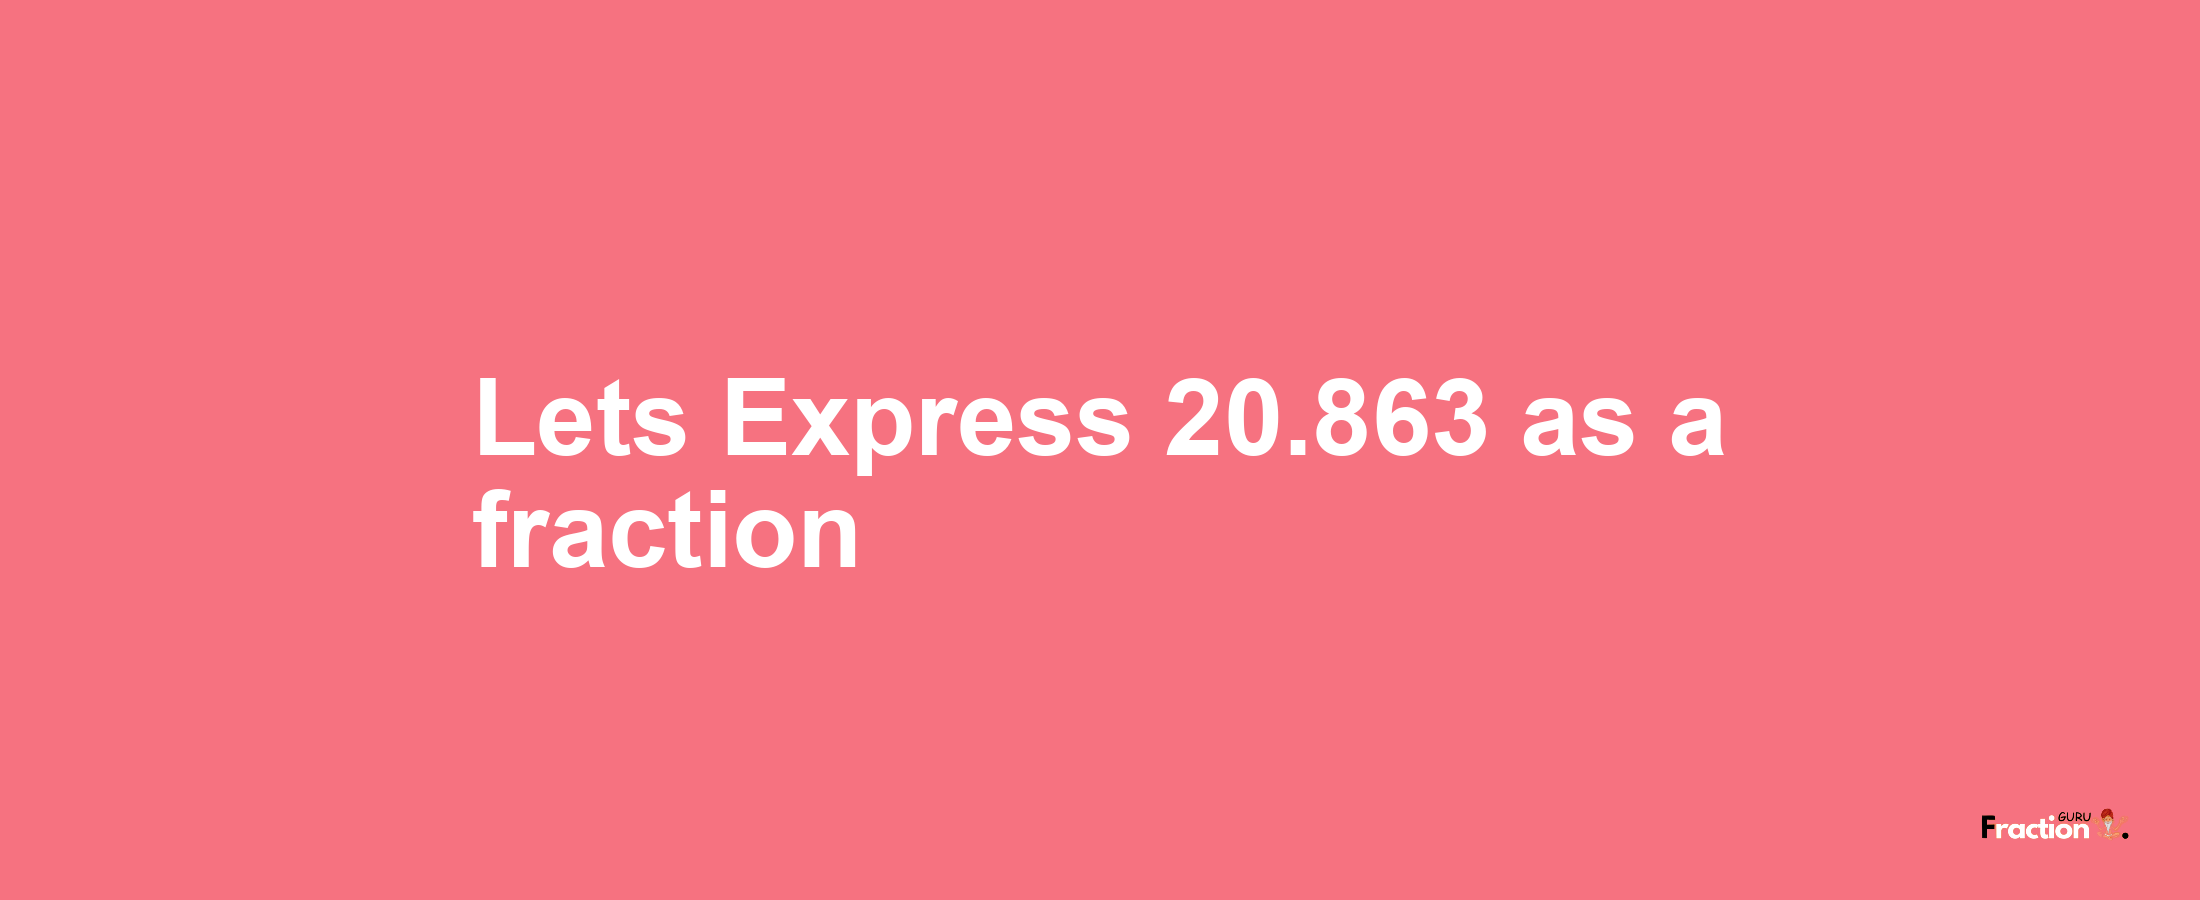 Lets Express 20.863 as afraction